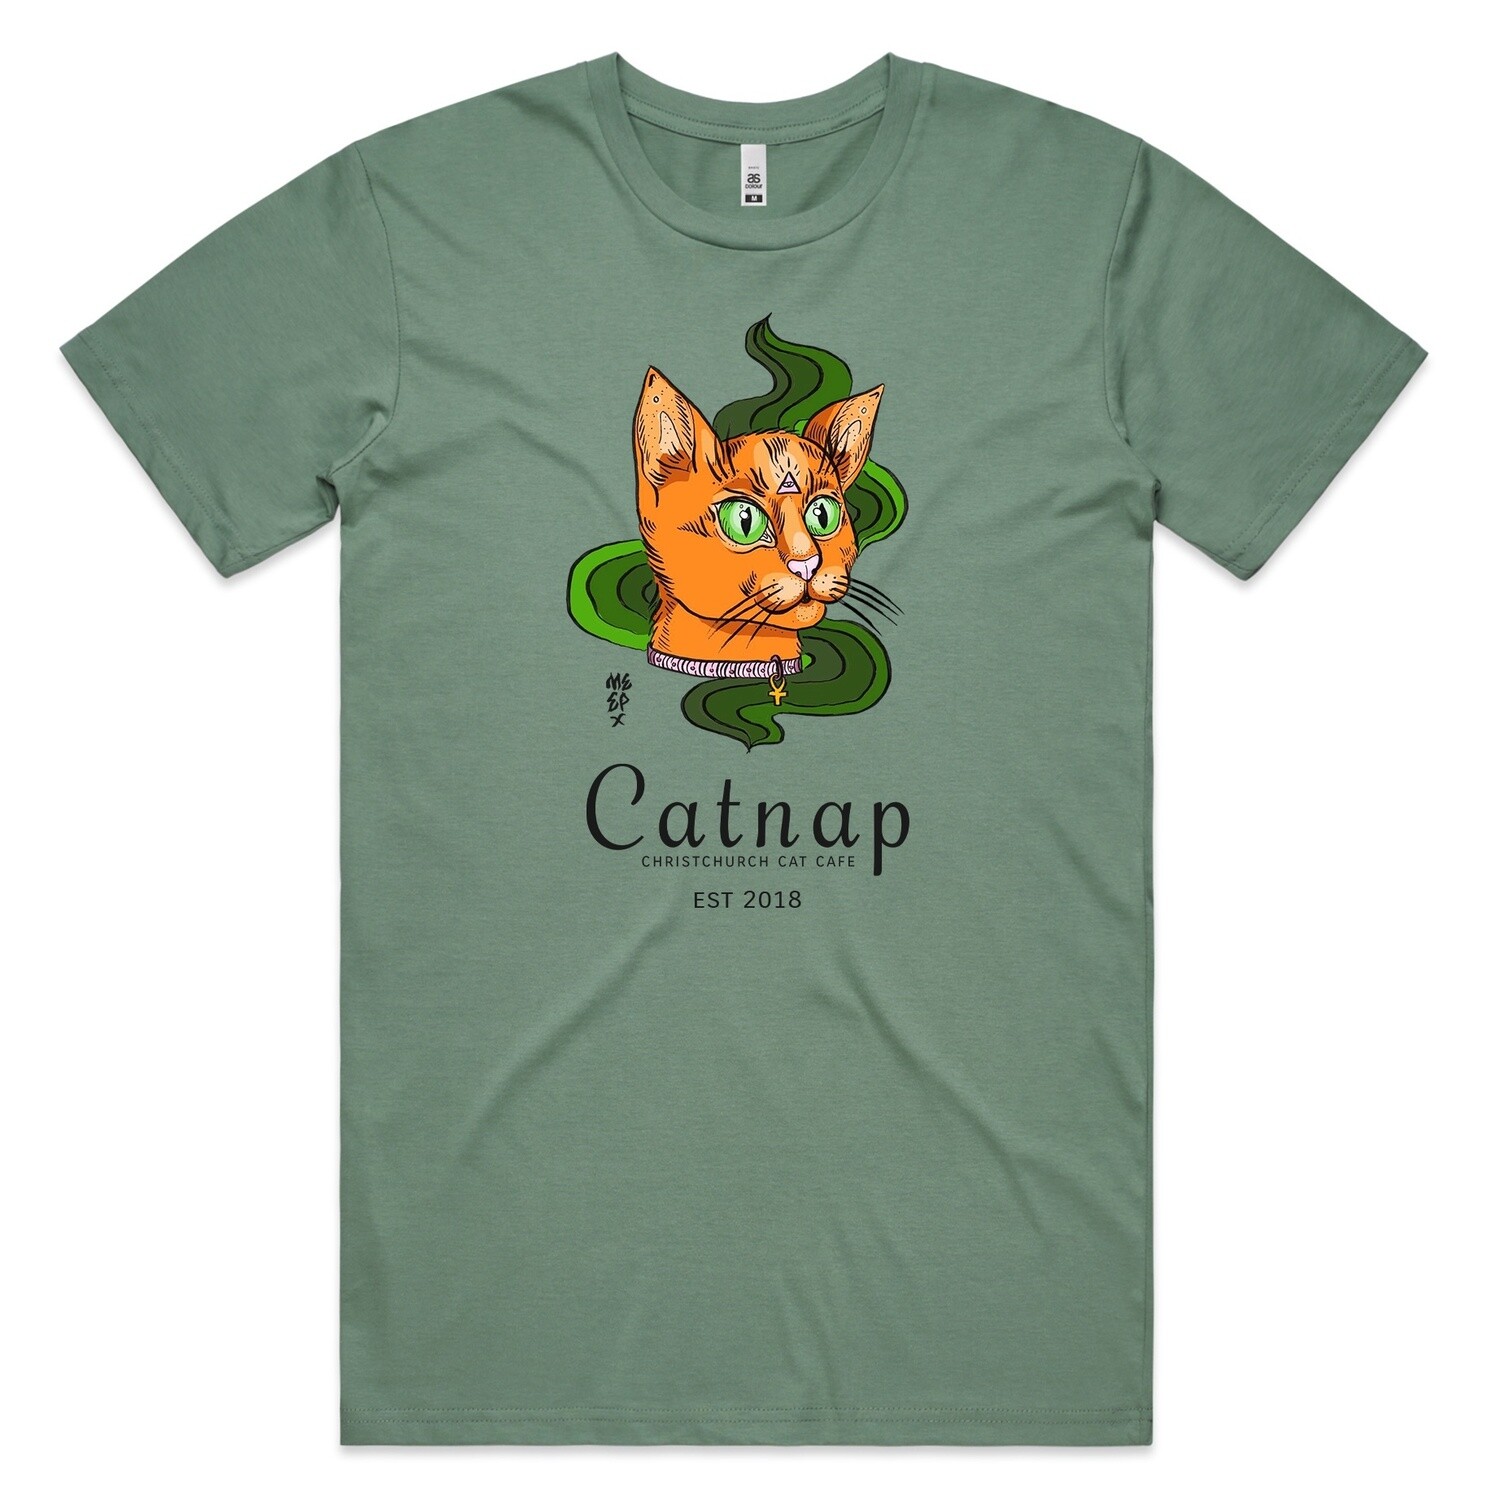 The All Seeing Cat Tee